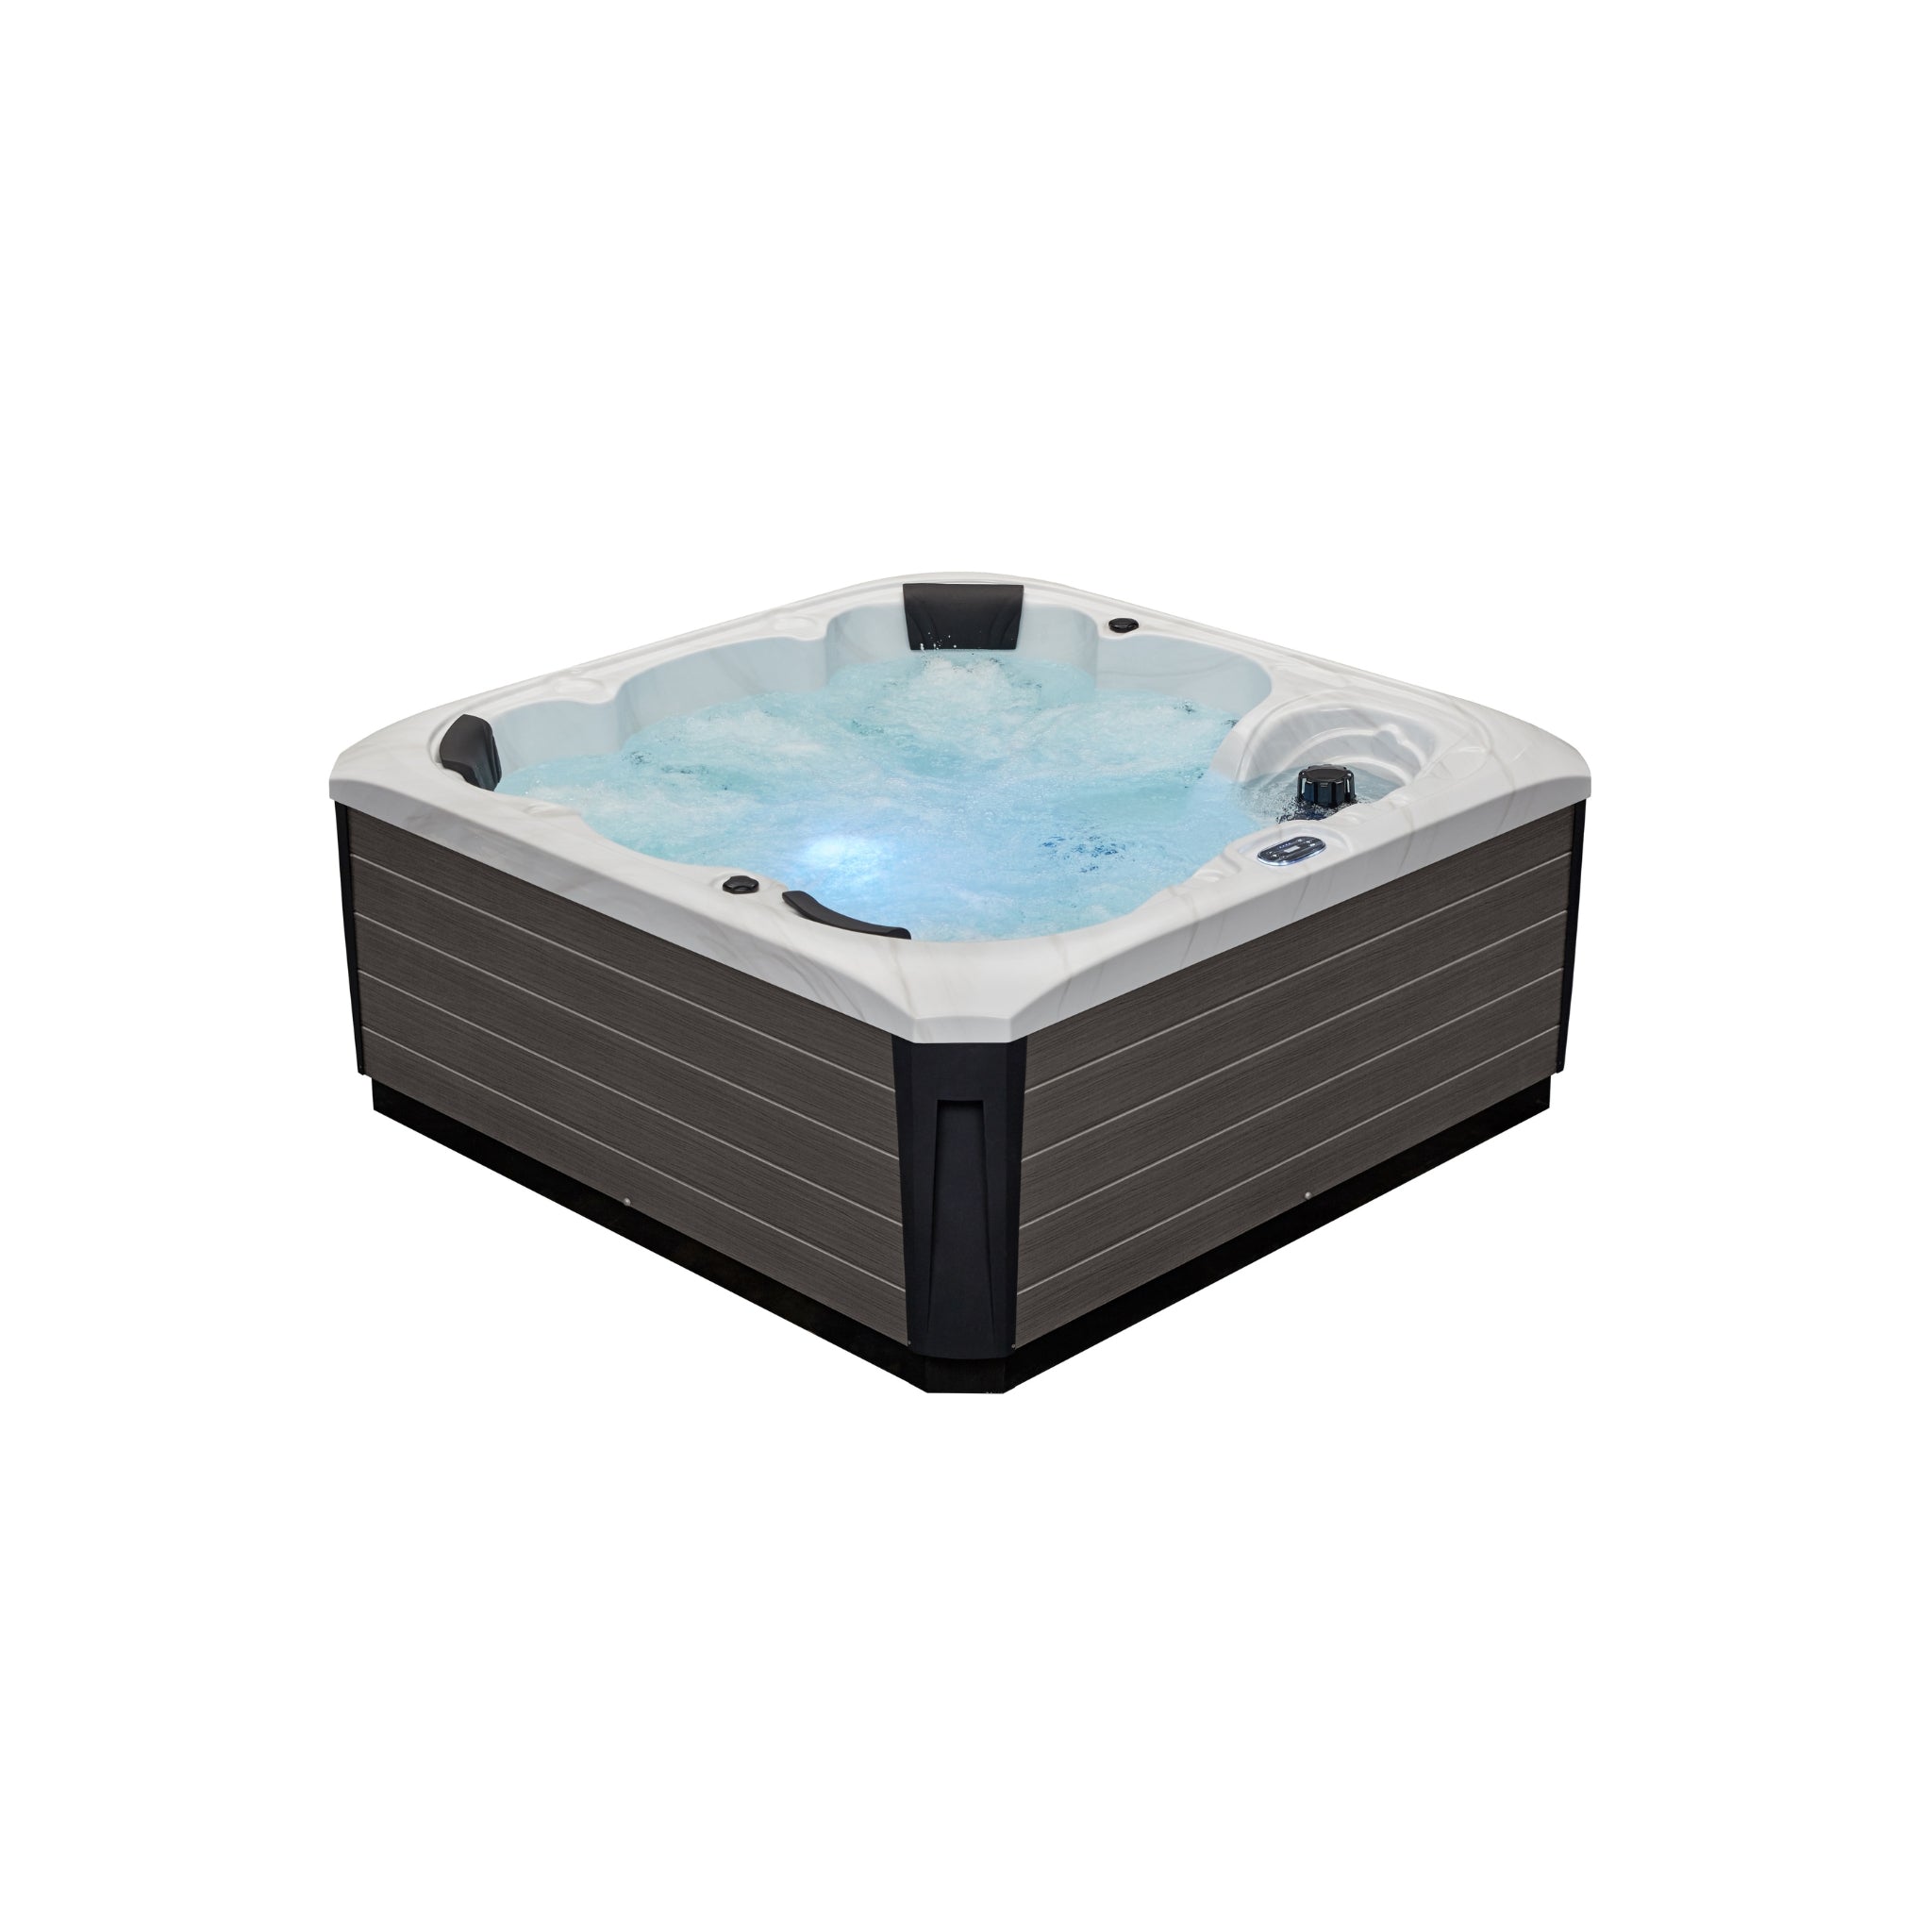 Savannah 6-Person 52 Jet Hot Tub with Lounger